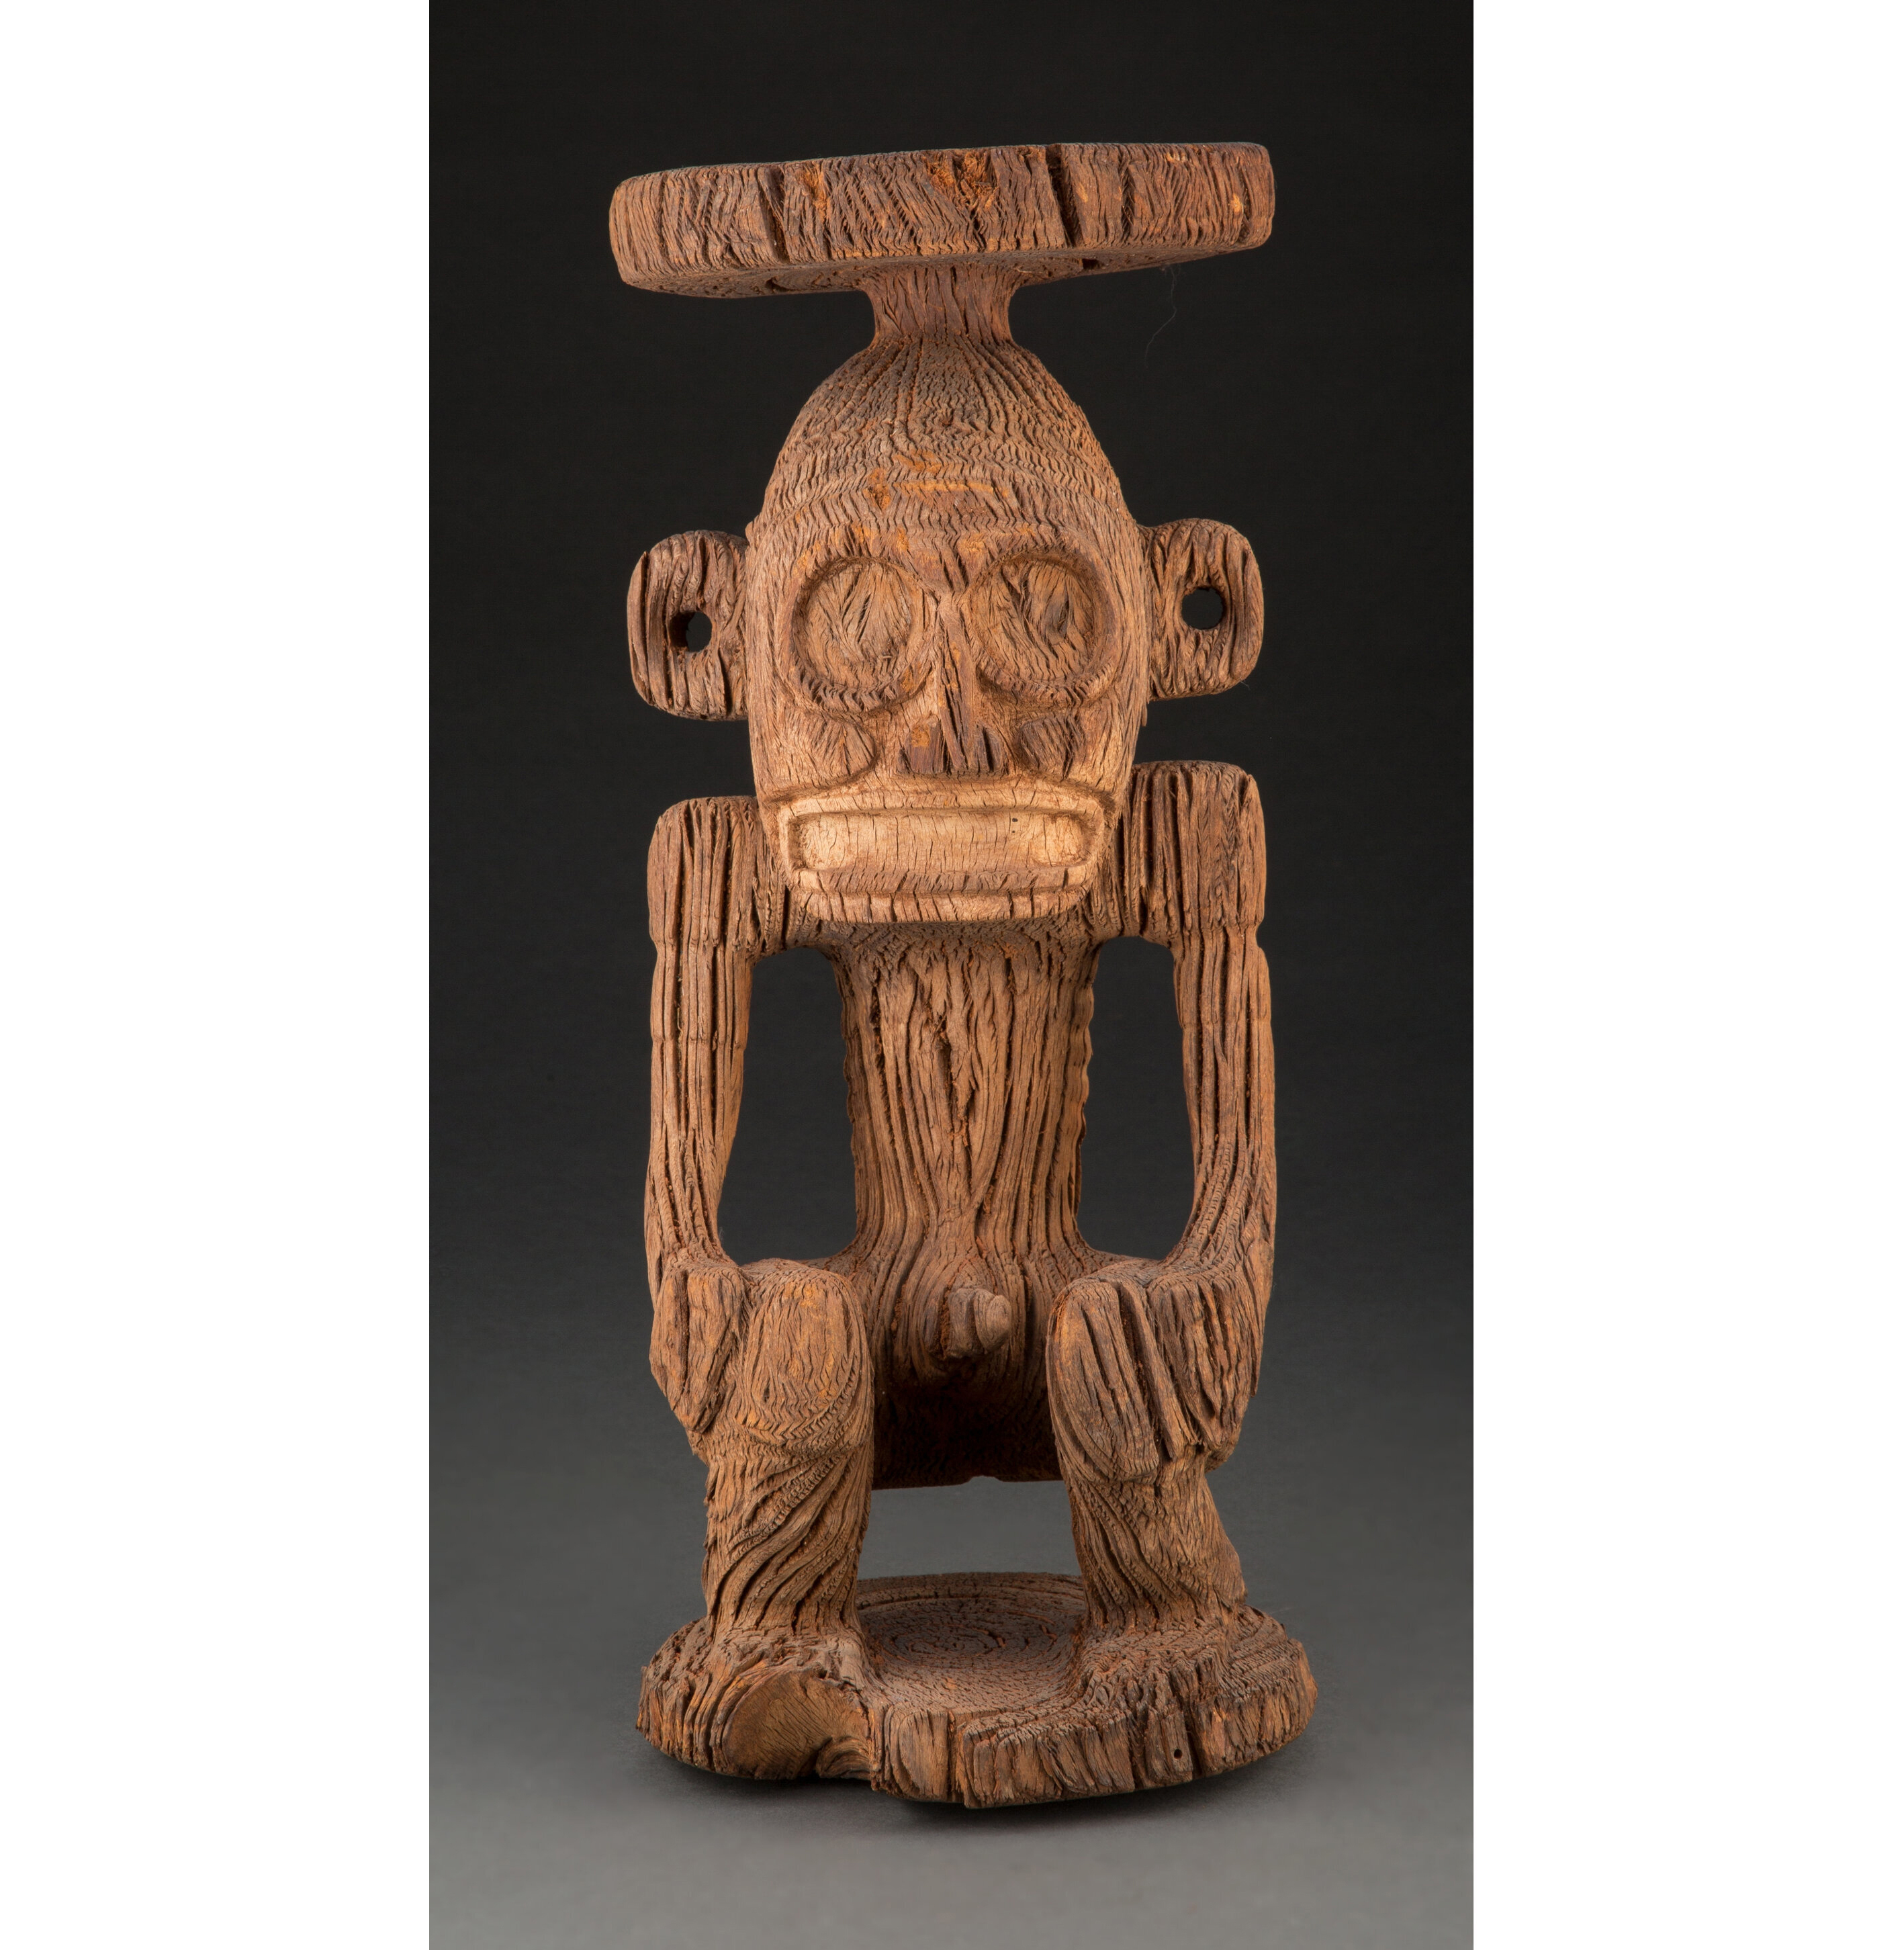 Dominican Taino cohoba stand, est. $60,000-$80,000. Image courtesy of Heritage Auctions